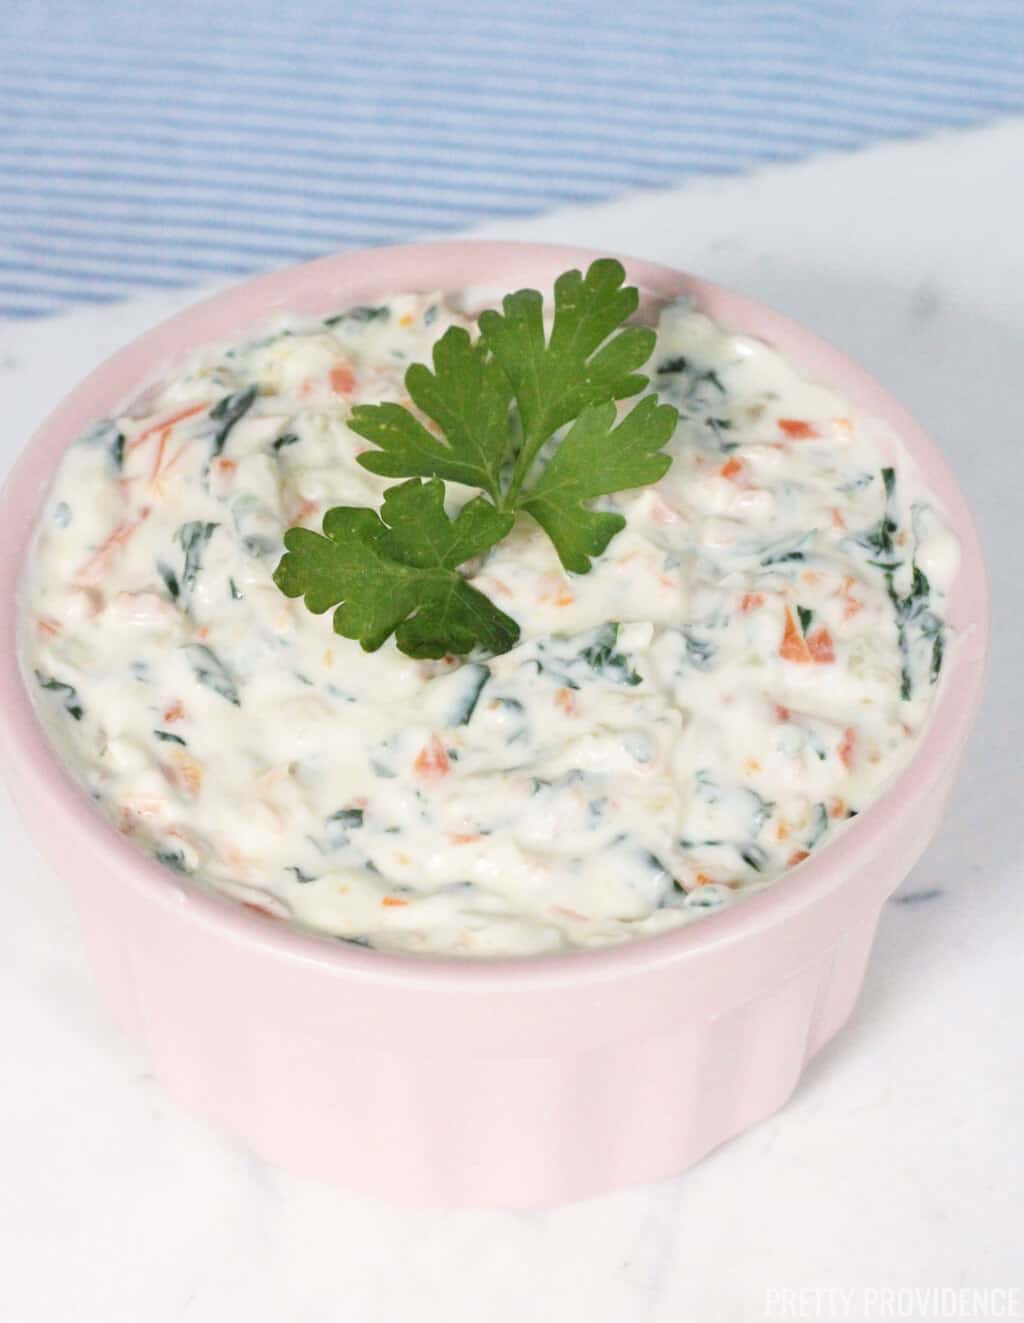 Healthy veggie dip made with yogurt, sautéed vegetables, in a pink bowl and parsley as a garnish.